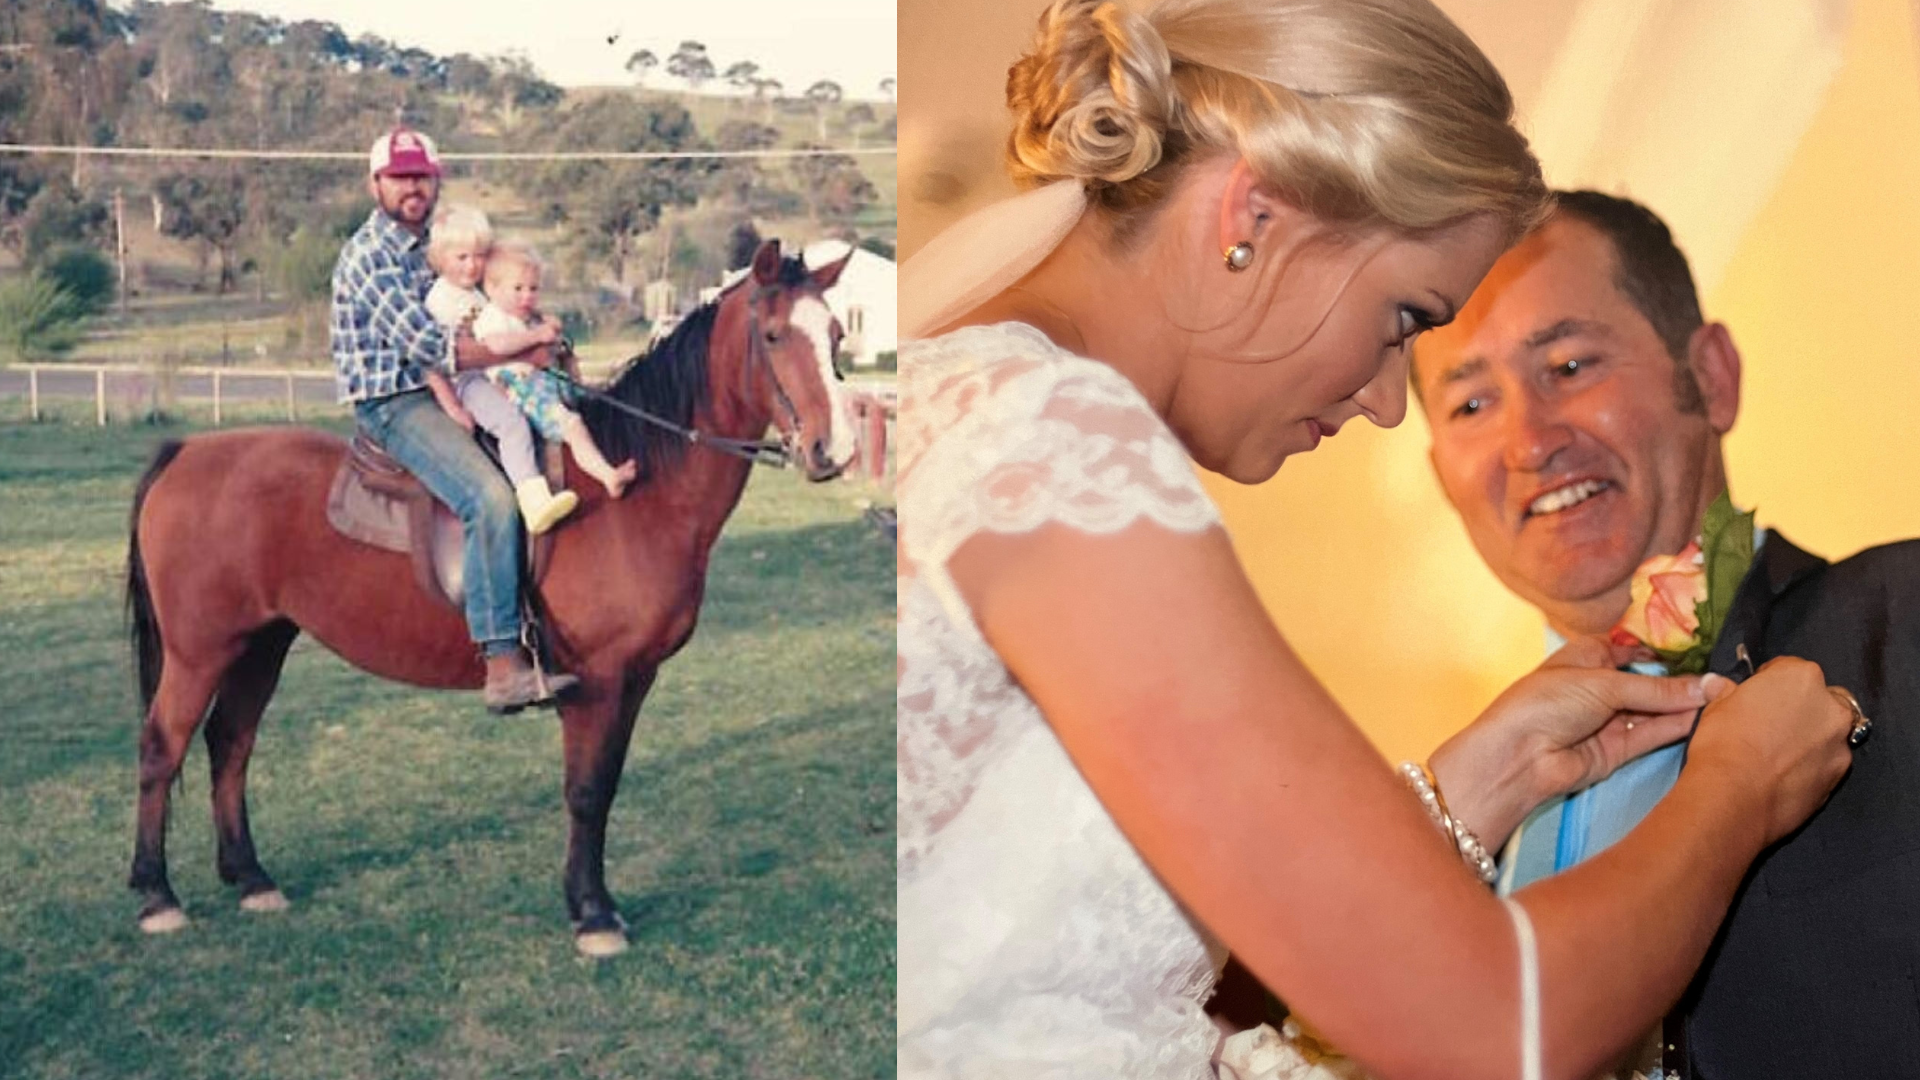 Composite image, two kids on a horse with dad standing next to them plus bride pins flower on dad's jacket